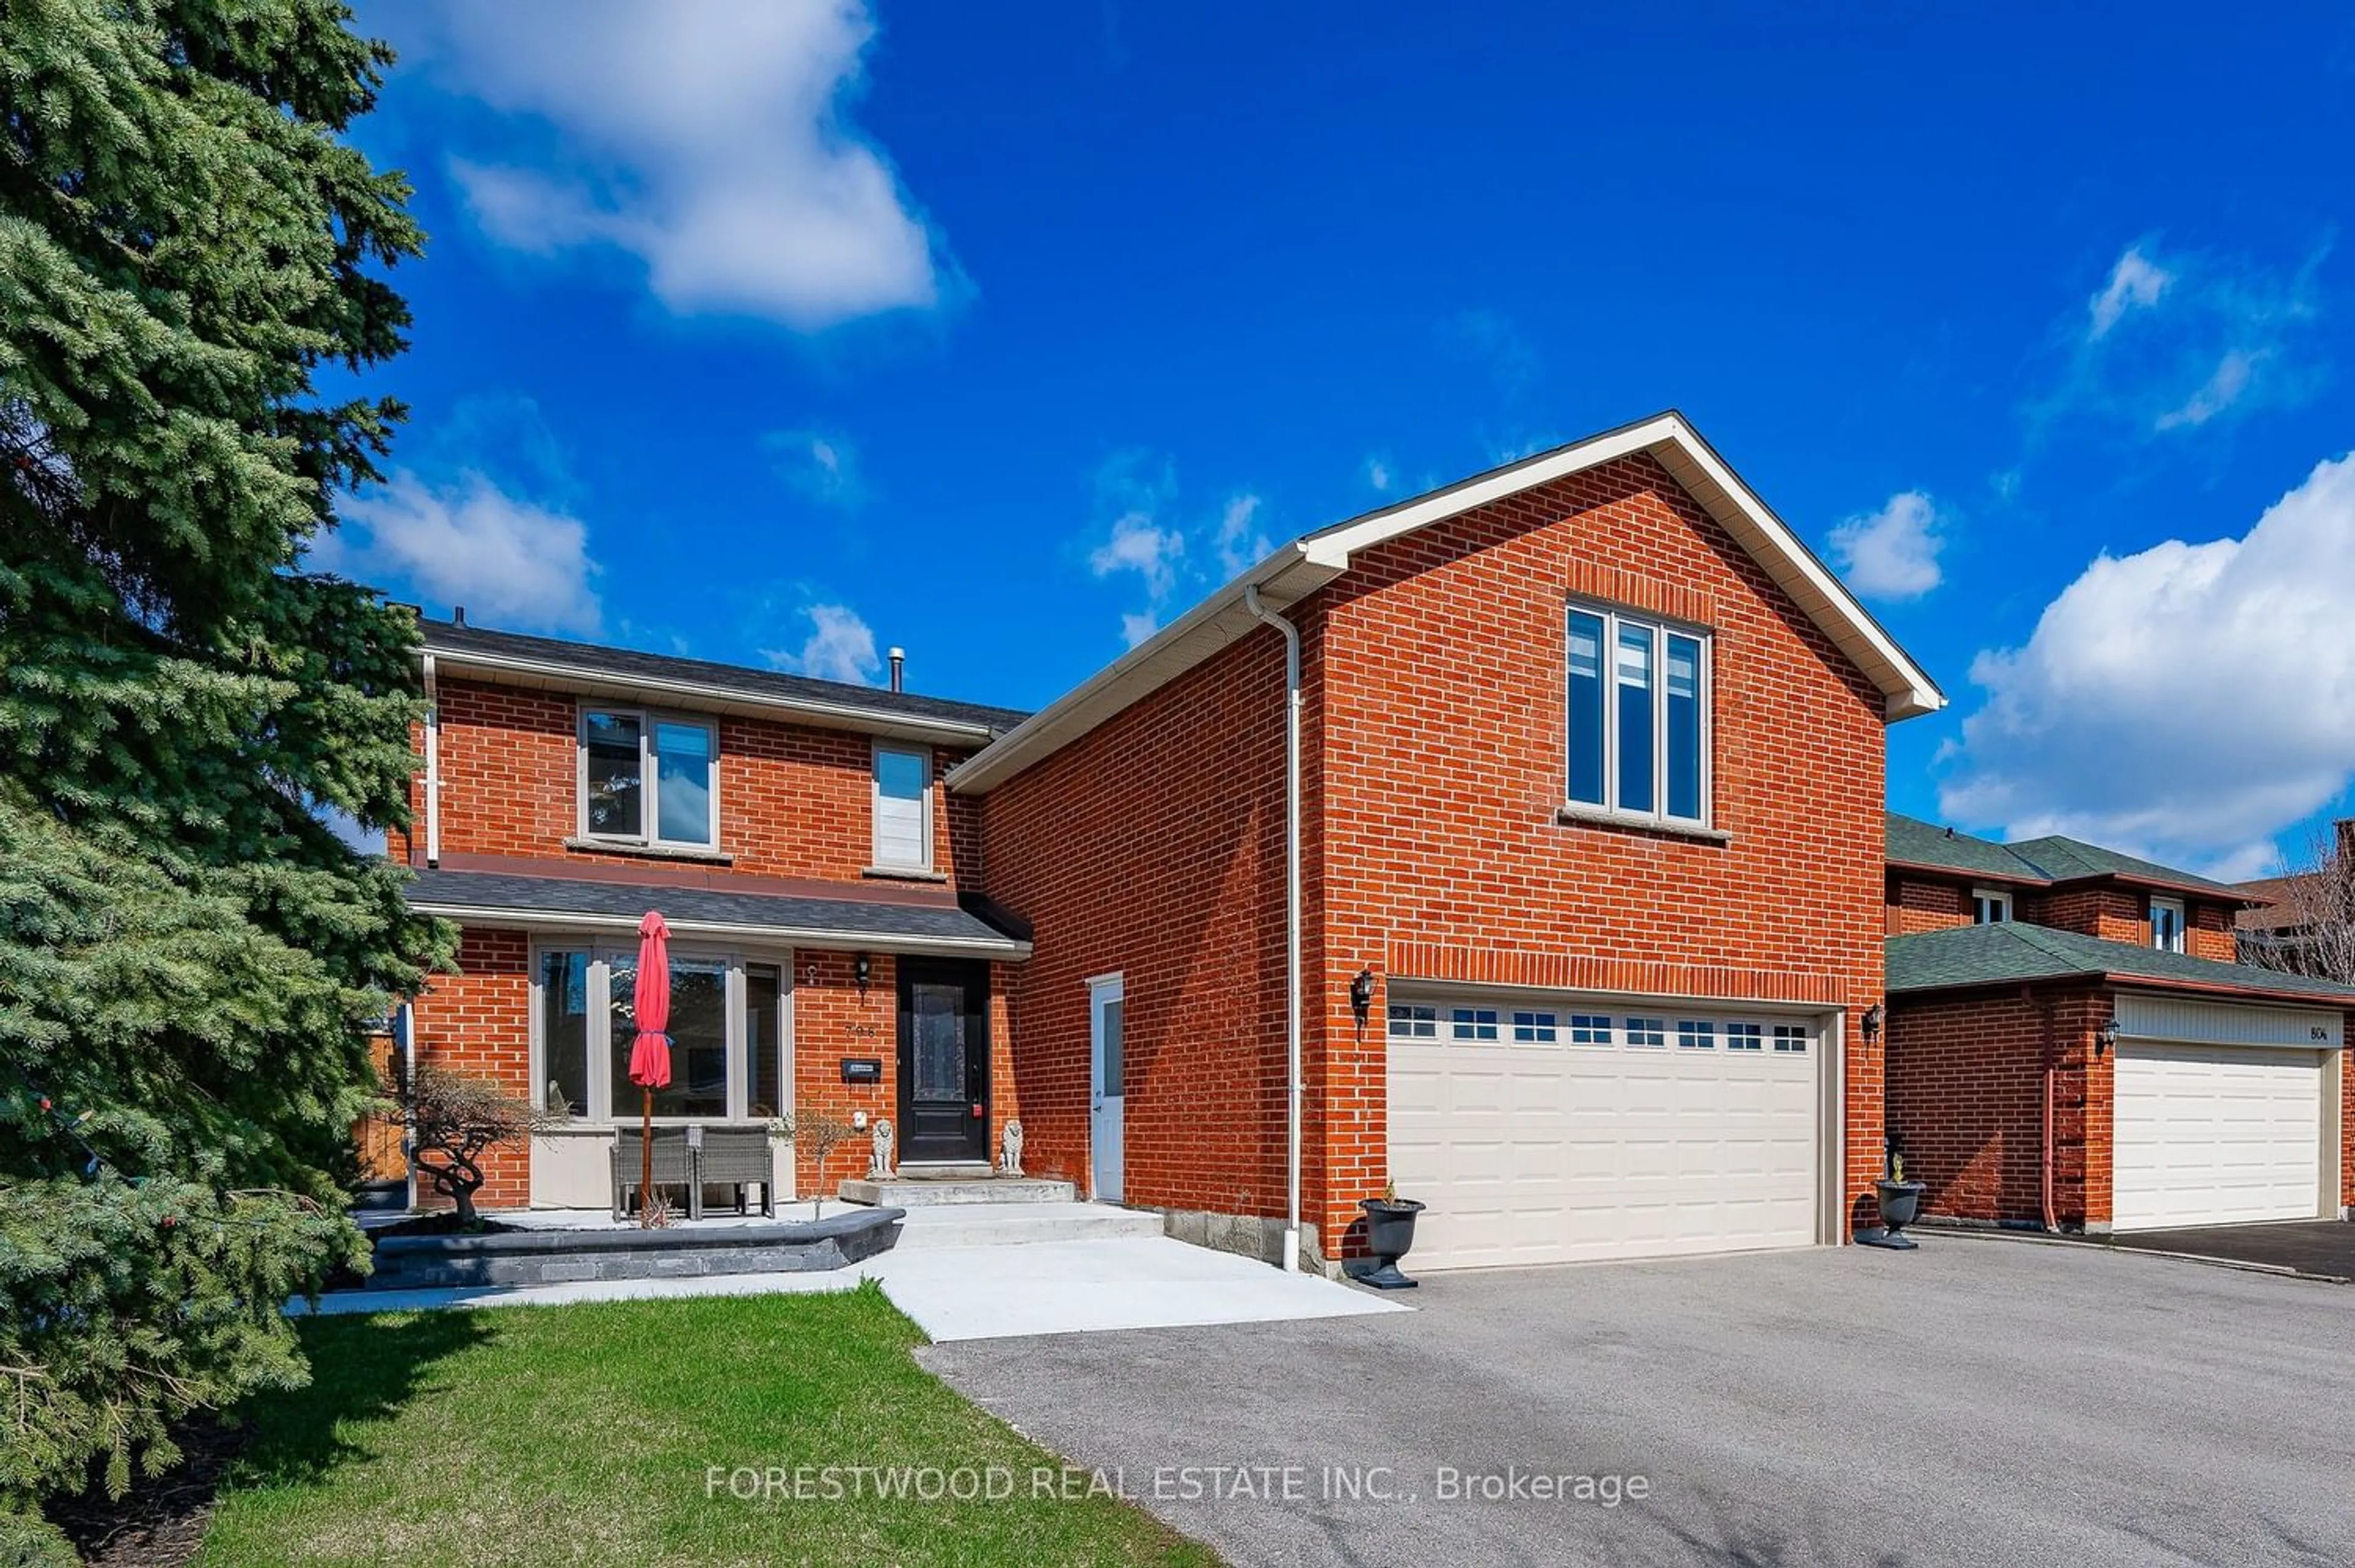 Home with brick exterior material for 798 Willowbank Tr, Mississauga Ontario L4W 3M2